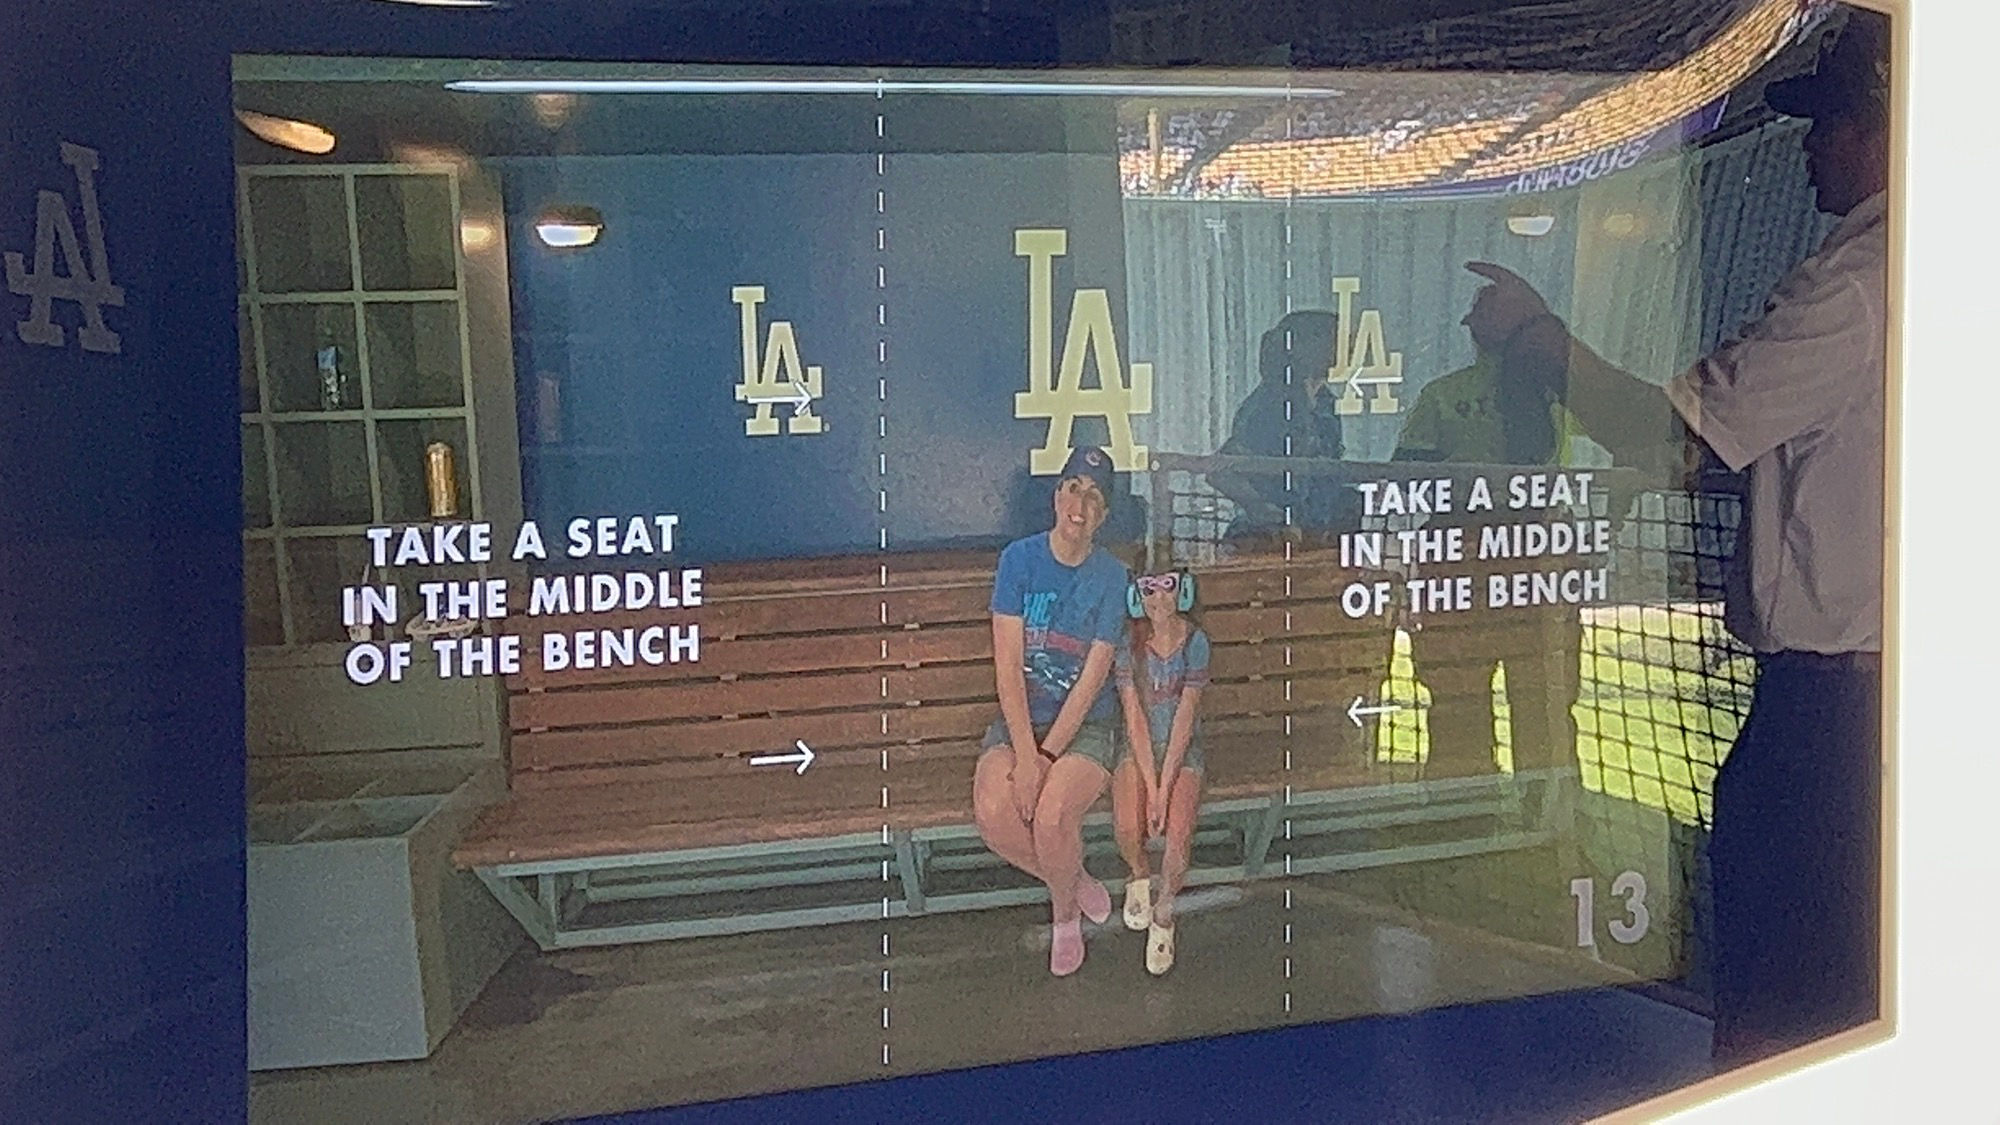 Dodger Dugout Virtual Photo Take a Seat in the Middle